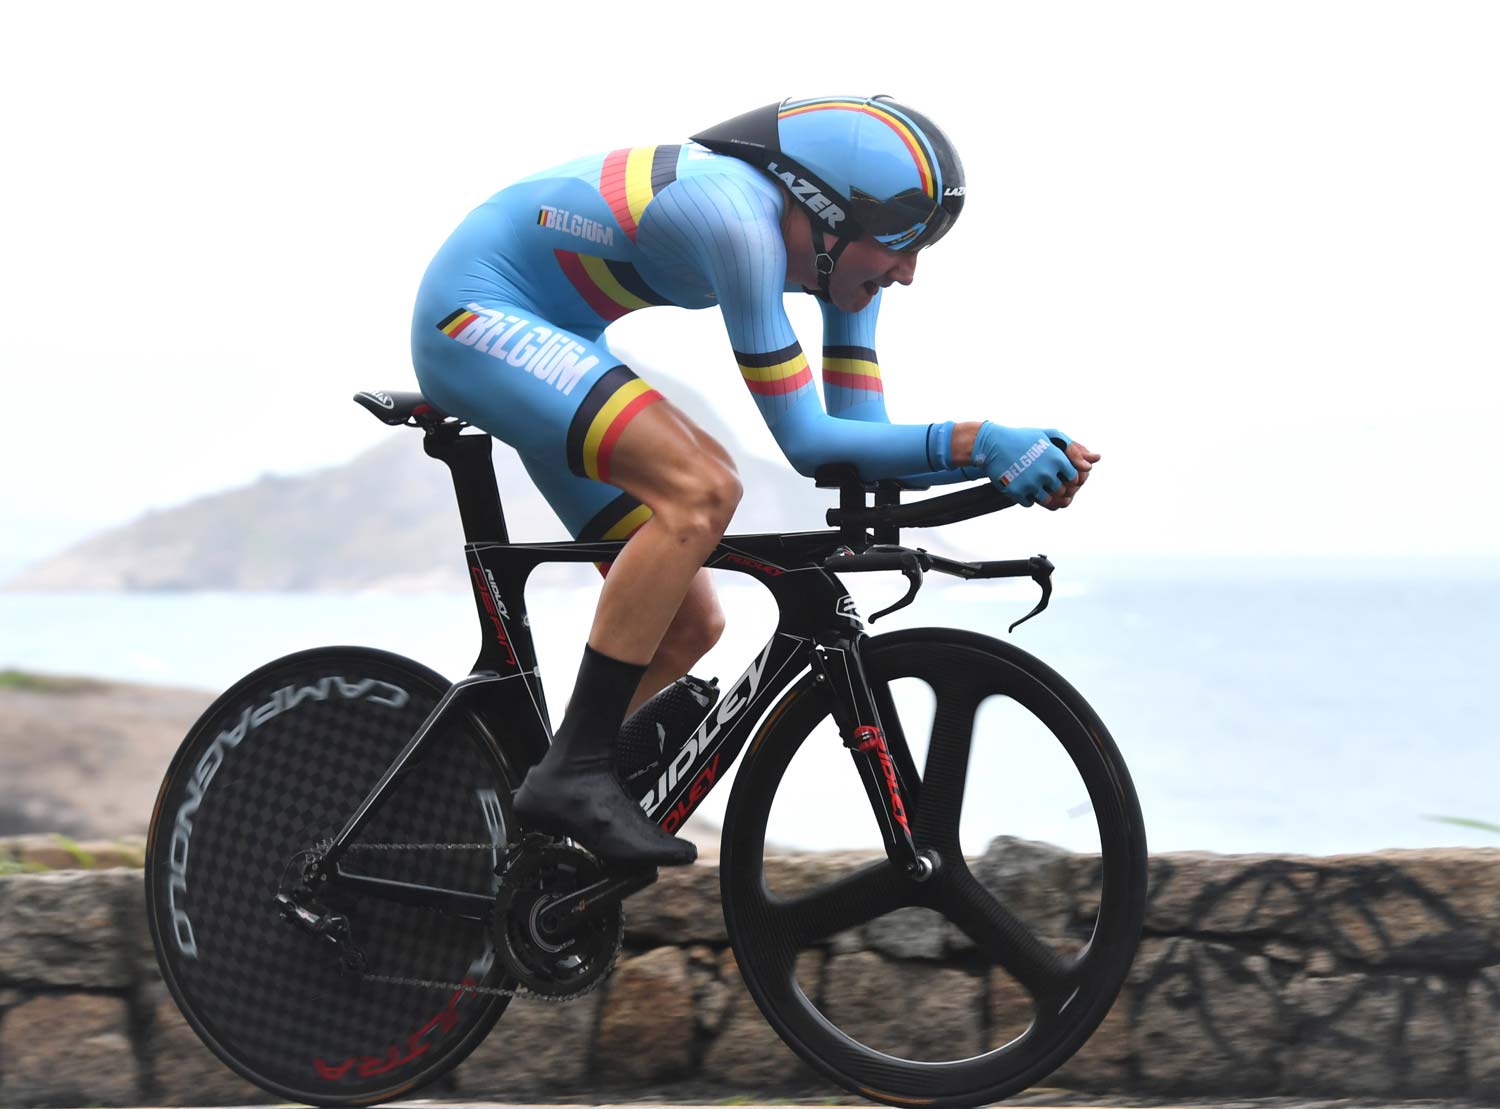 Tim Wellens was in the first wave of starters in the Olympic TT. Lazer helmets have created some innovative new shapes and we can expect to see new products on the track but the roadies are using designs seen before the Rio Games. Photo: Graham Watson